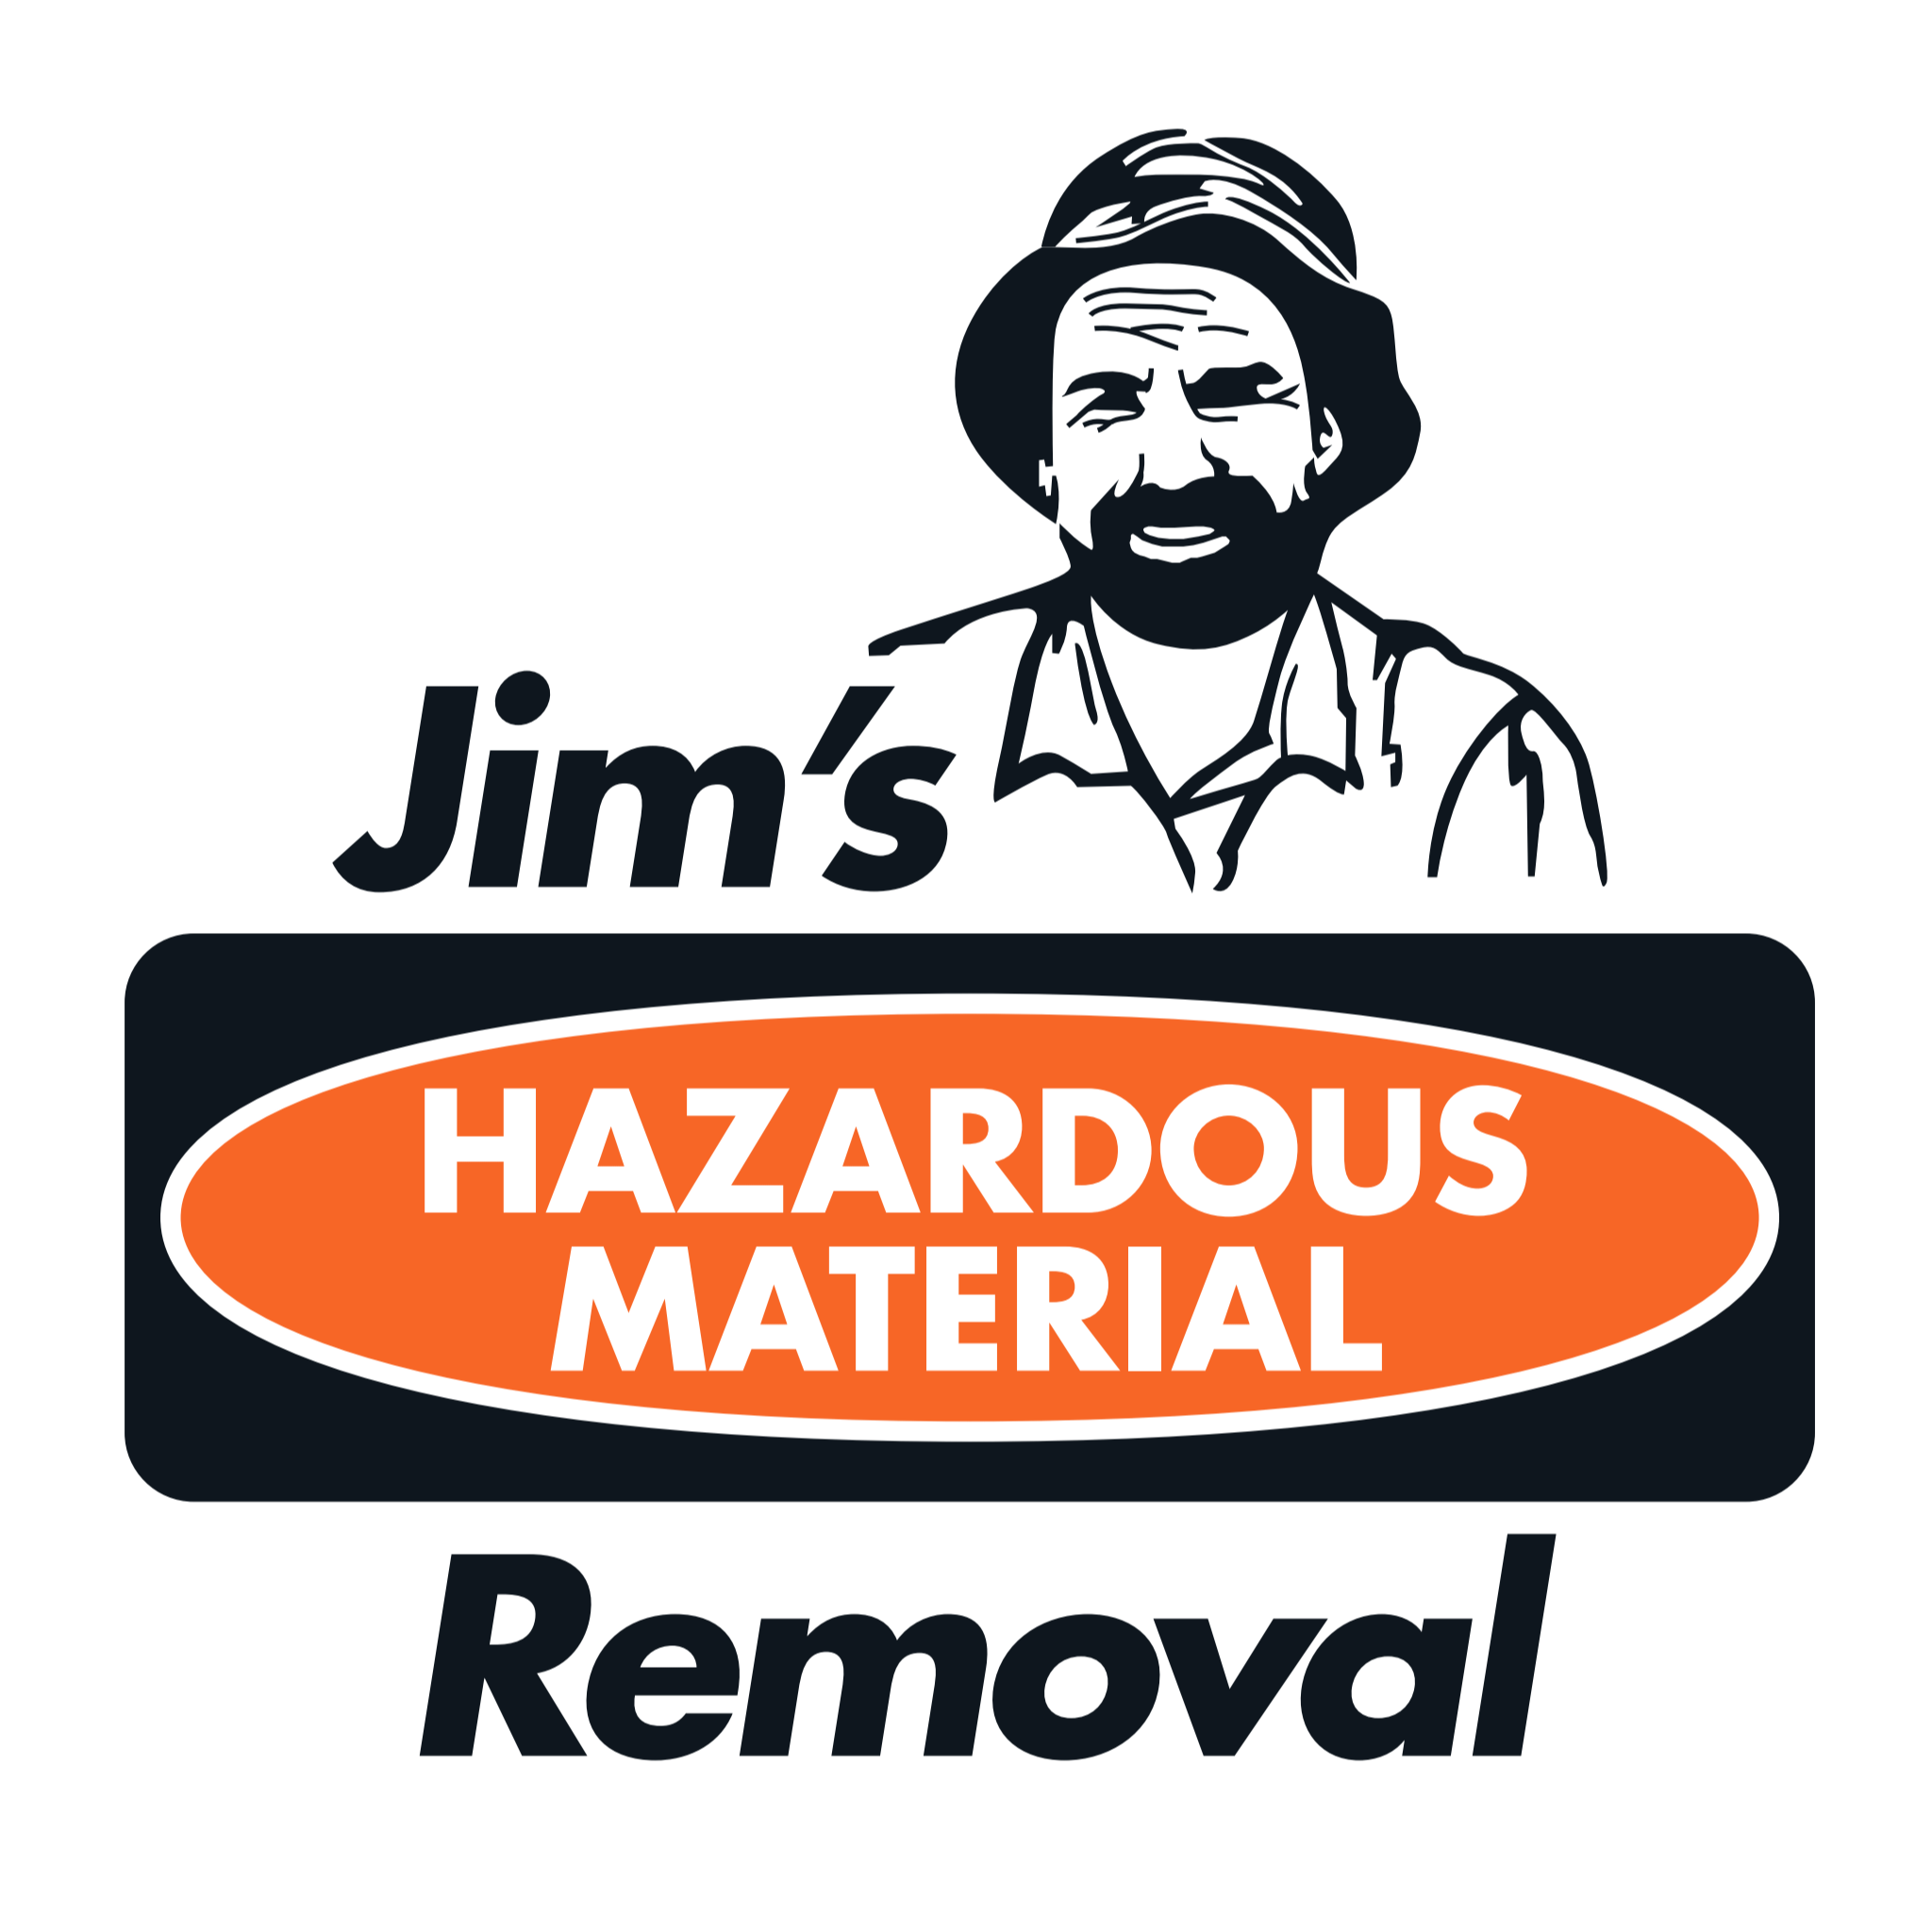 Jim's Hazardous Material Removal Box Hill - Mount Evelyn, VIC - 13 15 46 | ShowMeLocal.com